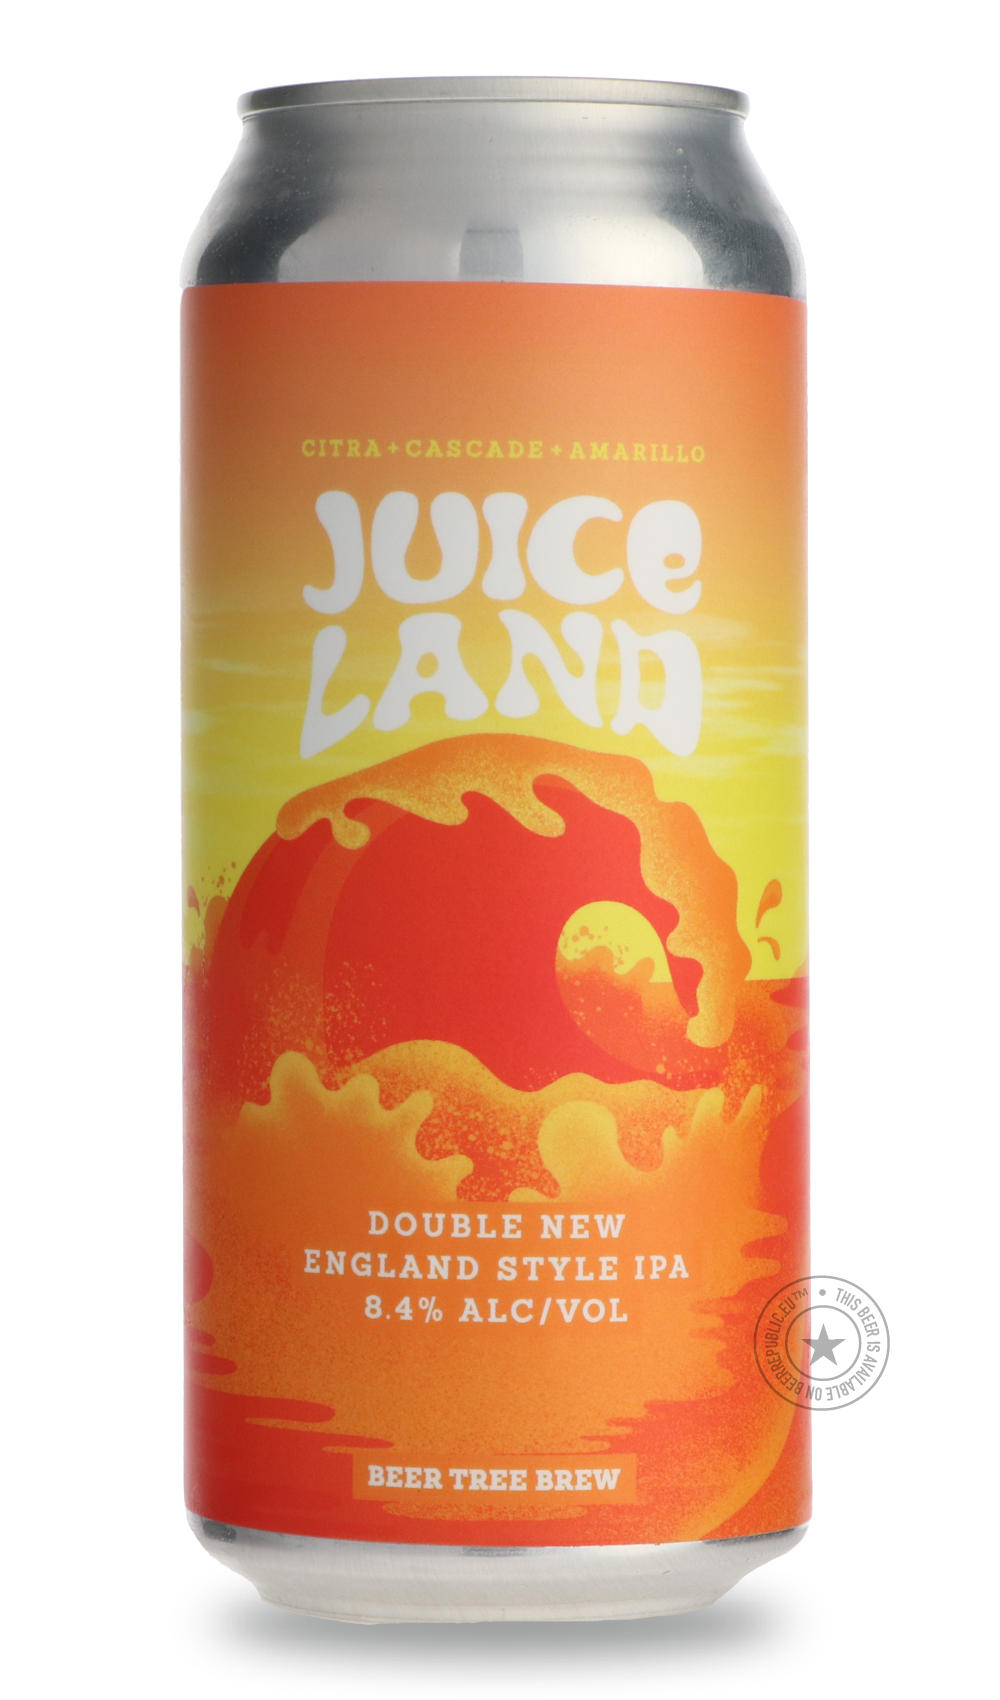 -Beer Tree- Juice Land - Citra, Cascade, Amarillo-IPA- Only @ Beer Republic - The best online beer store for American & Canadian craft beer - Buy beer online from the USA and Canada - Bier online kopen - Amerikaans bier kopen - Craft beer store - Craft beer kopen - Amerikanisch bier kaufen - Bier online kaufen - Acheter biere online - IPA - Stout - Porter - New England IPA - Hazy IPA - Imperial Stout - Barrel Aged - Barrel Aged Imperial Stout - Brown - Dark beer - Blond - Blonde - Pilsner - Lager - Wheat - 